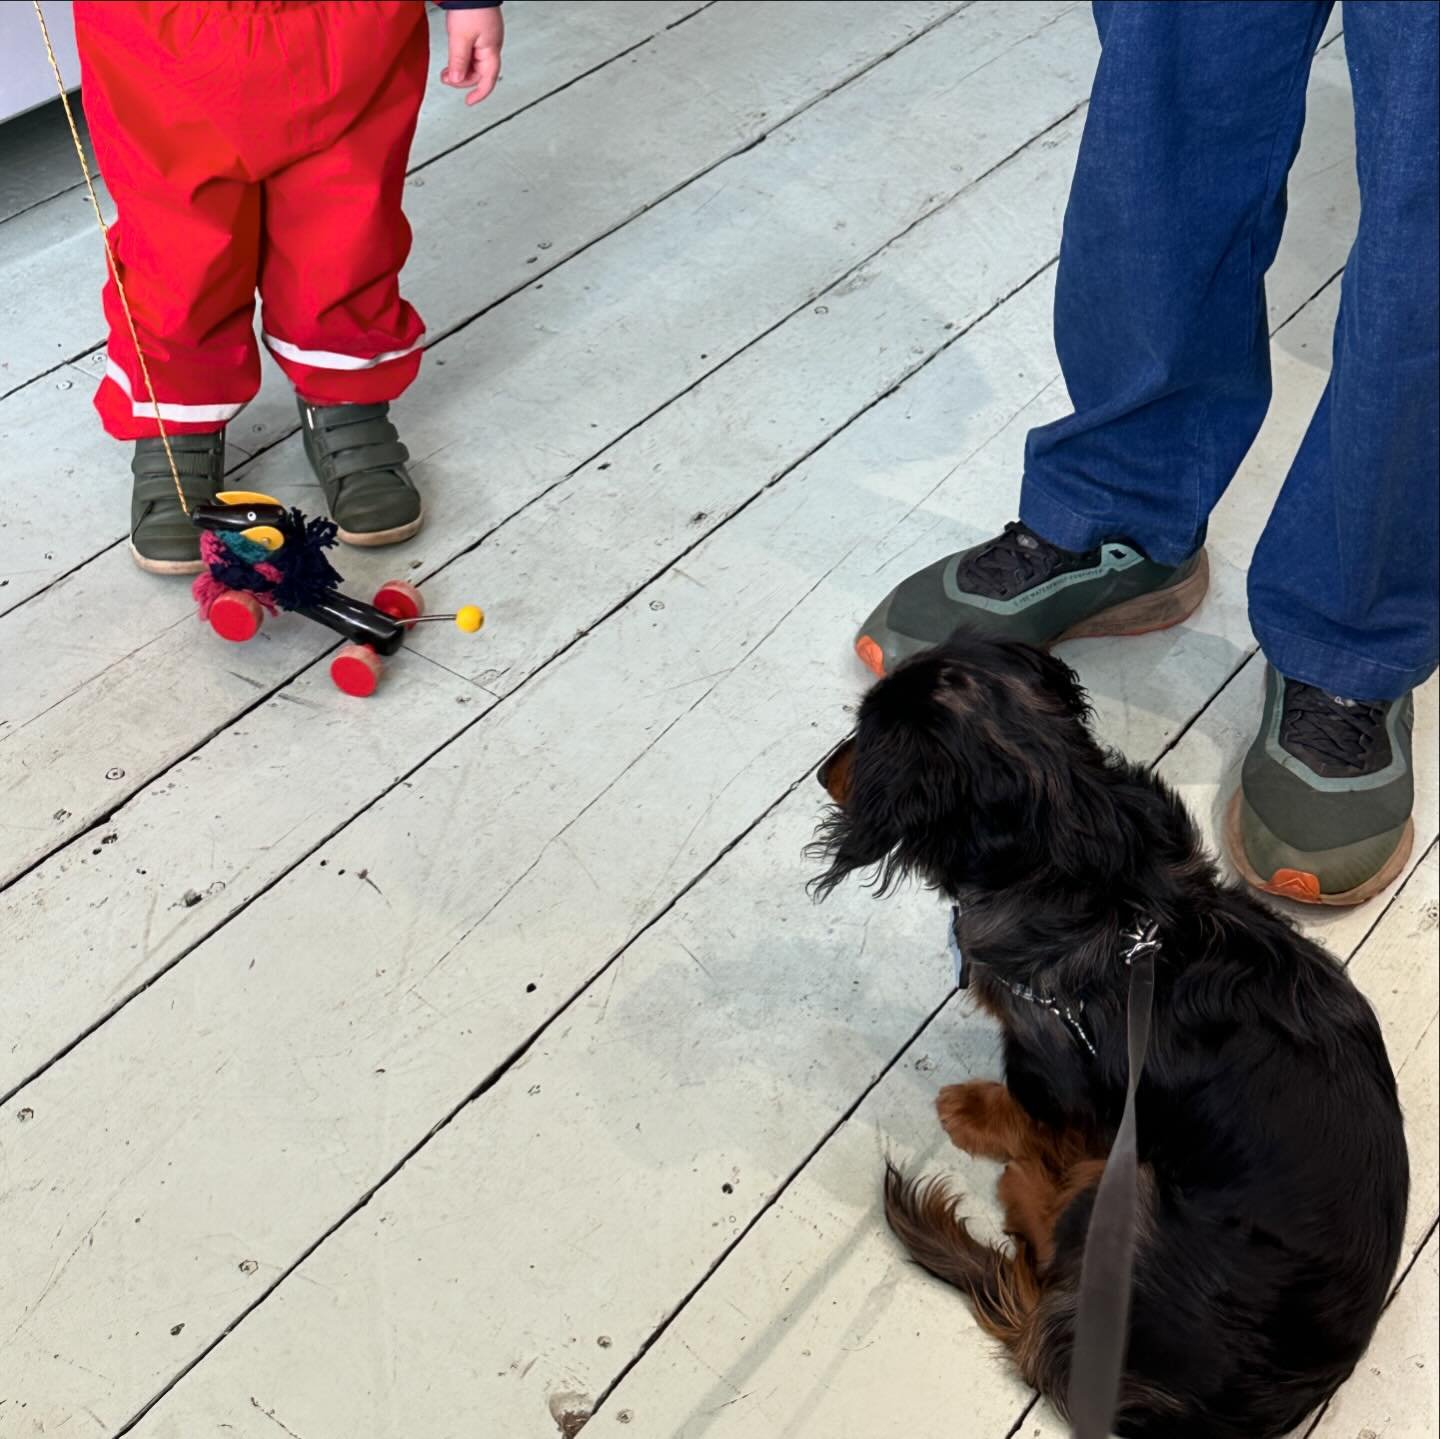 Remember my story about Winnie the toy wooden sausage dog? 💚 Humphrey met Winnie and gave our special little customer some kisses (licks) too! Anyone else&rsquo;s kids play Refill Shops? 🥰

Scroll back a reel or two for the story!